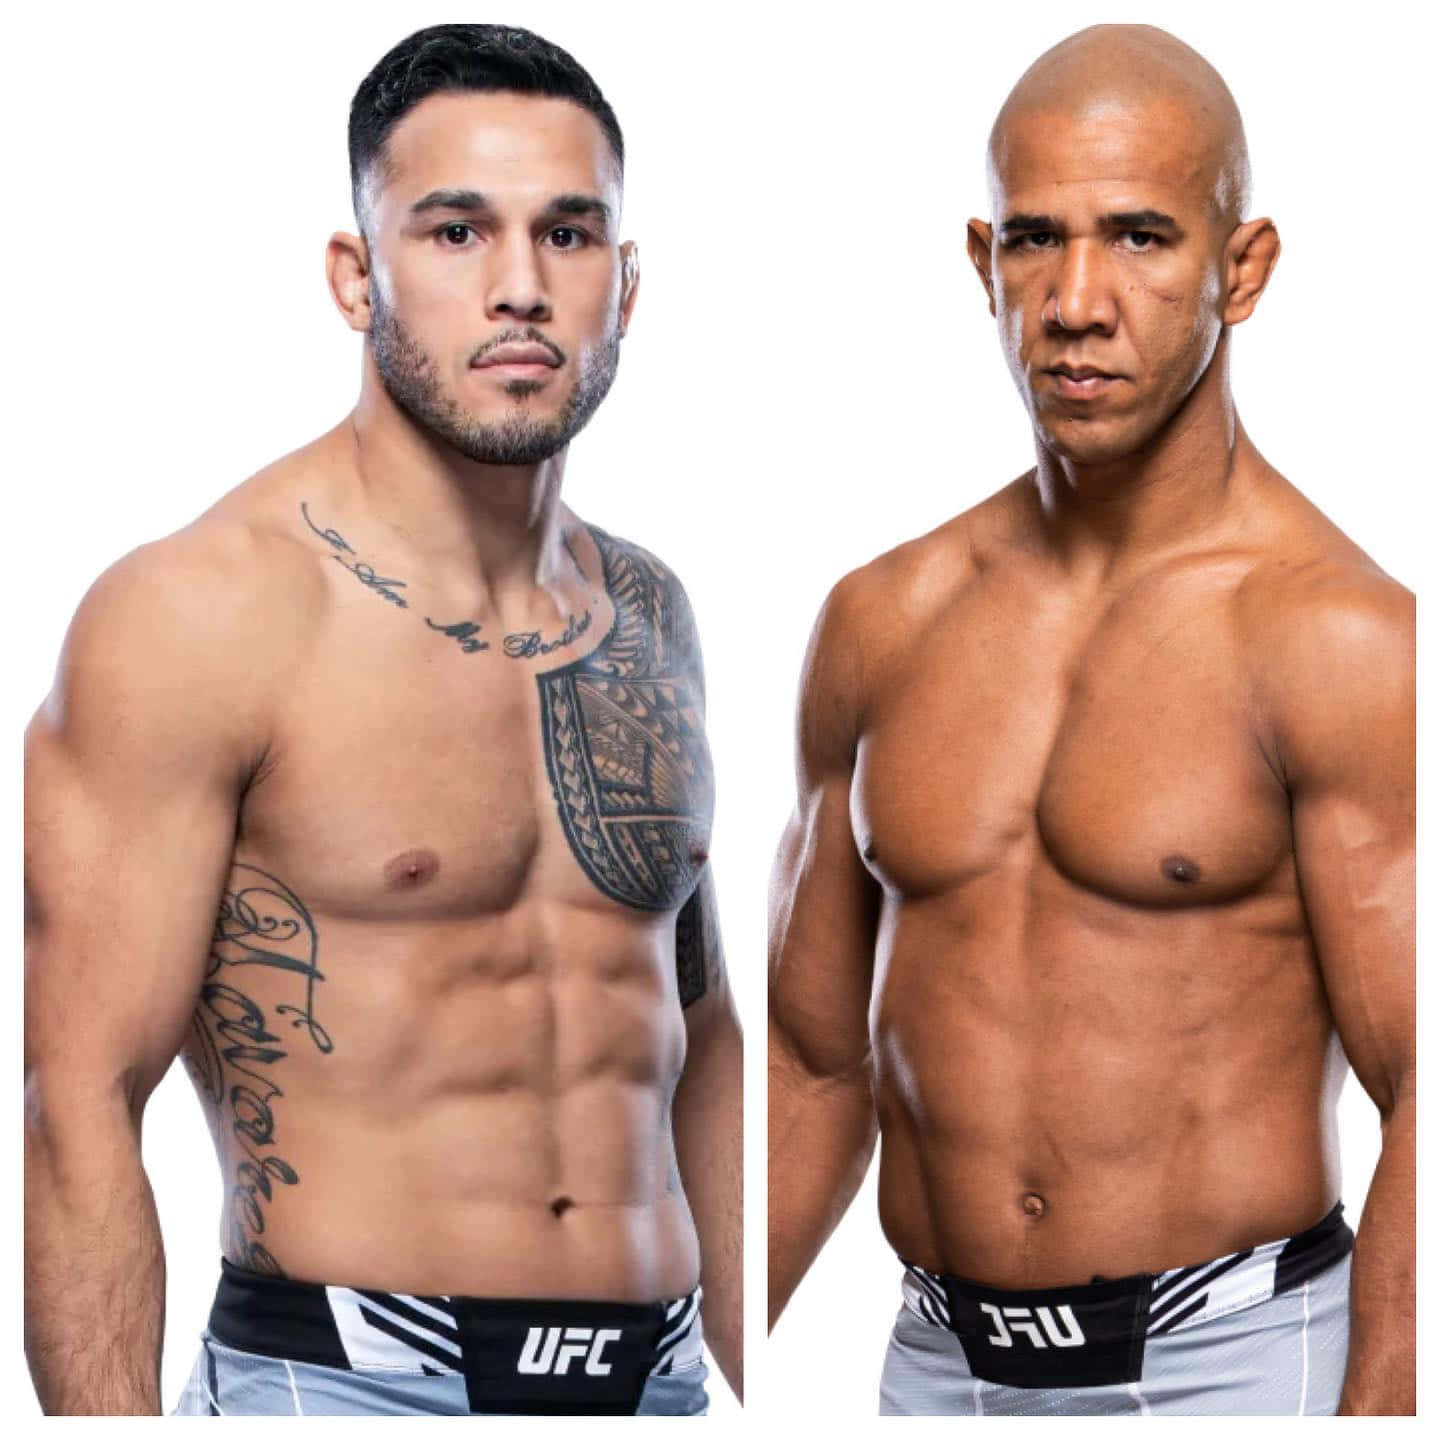 UFC Fighters Brad Tavares And Gregory Rodrigues Wallpaper